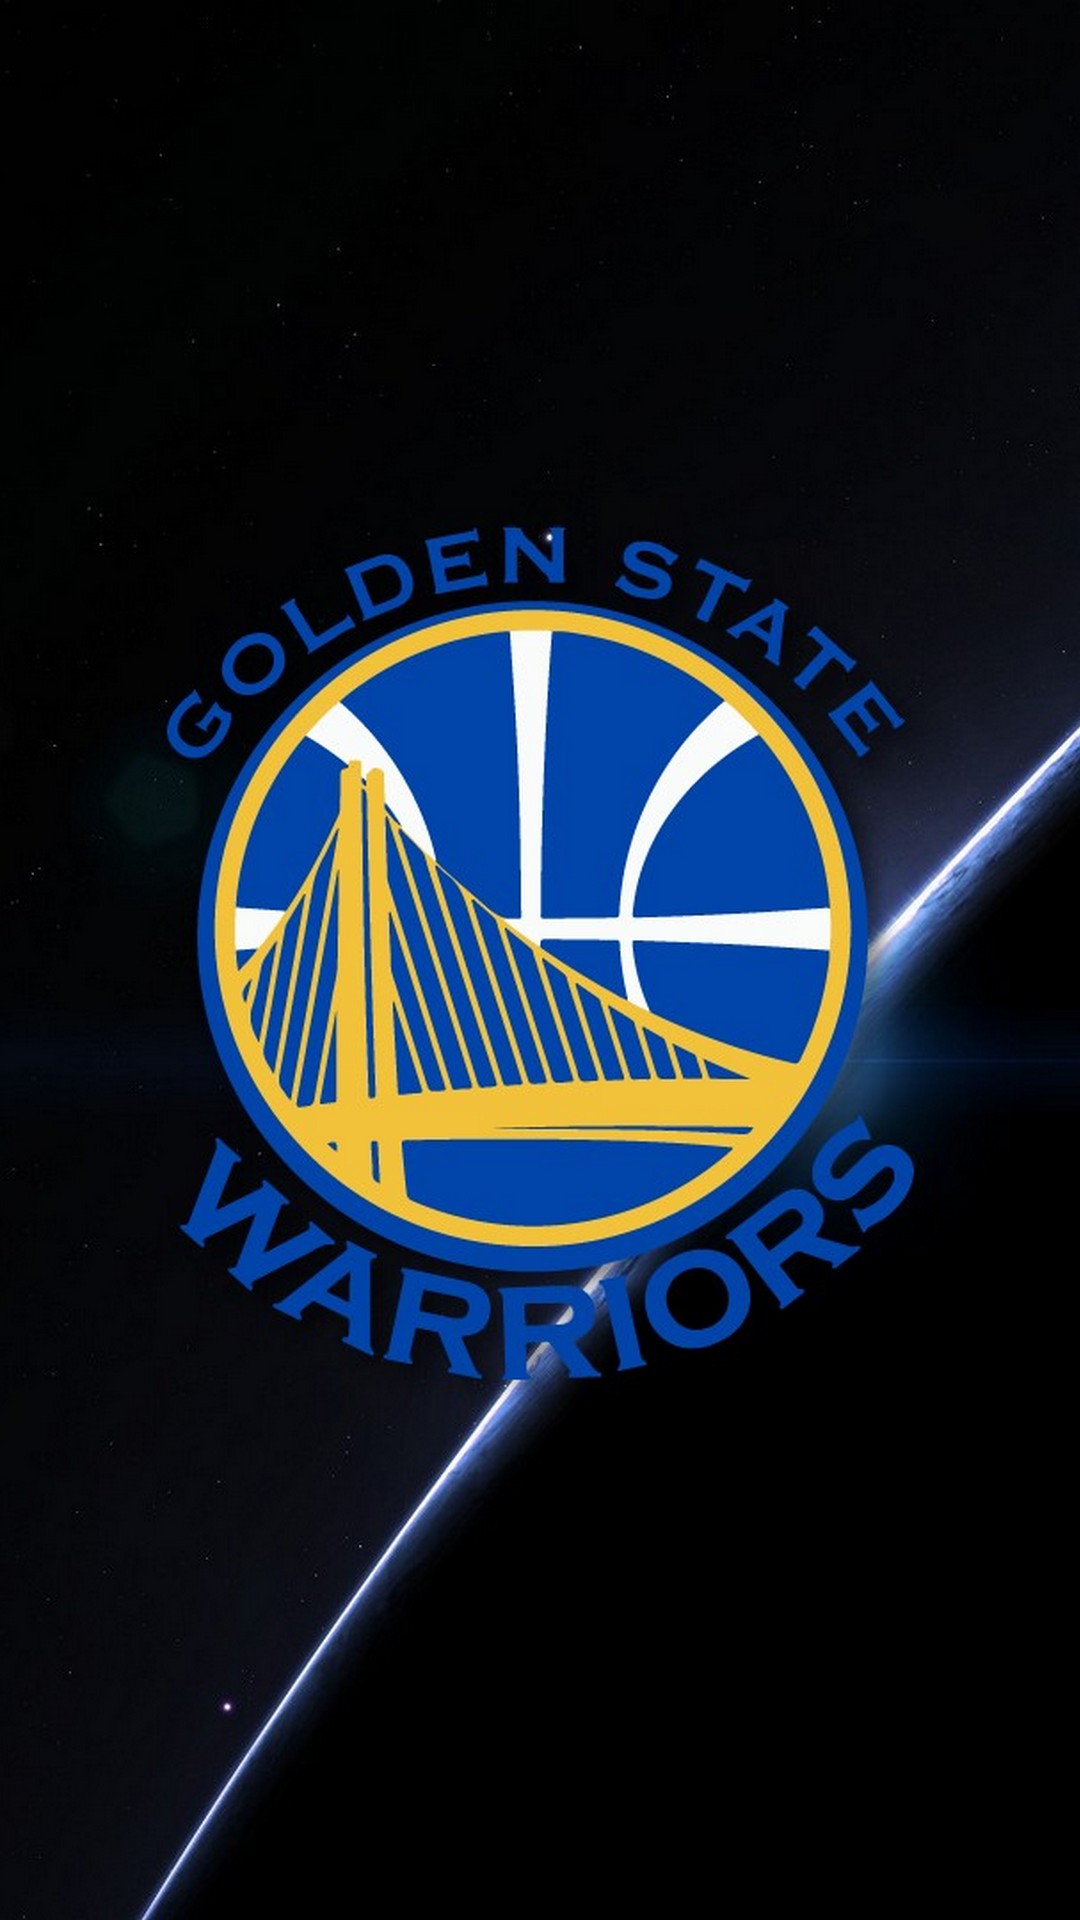 Golden State Warriors Wallpaper For Mobile With Image - Emblem - HD Wallpaper 